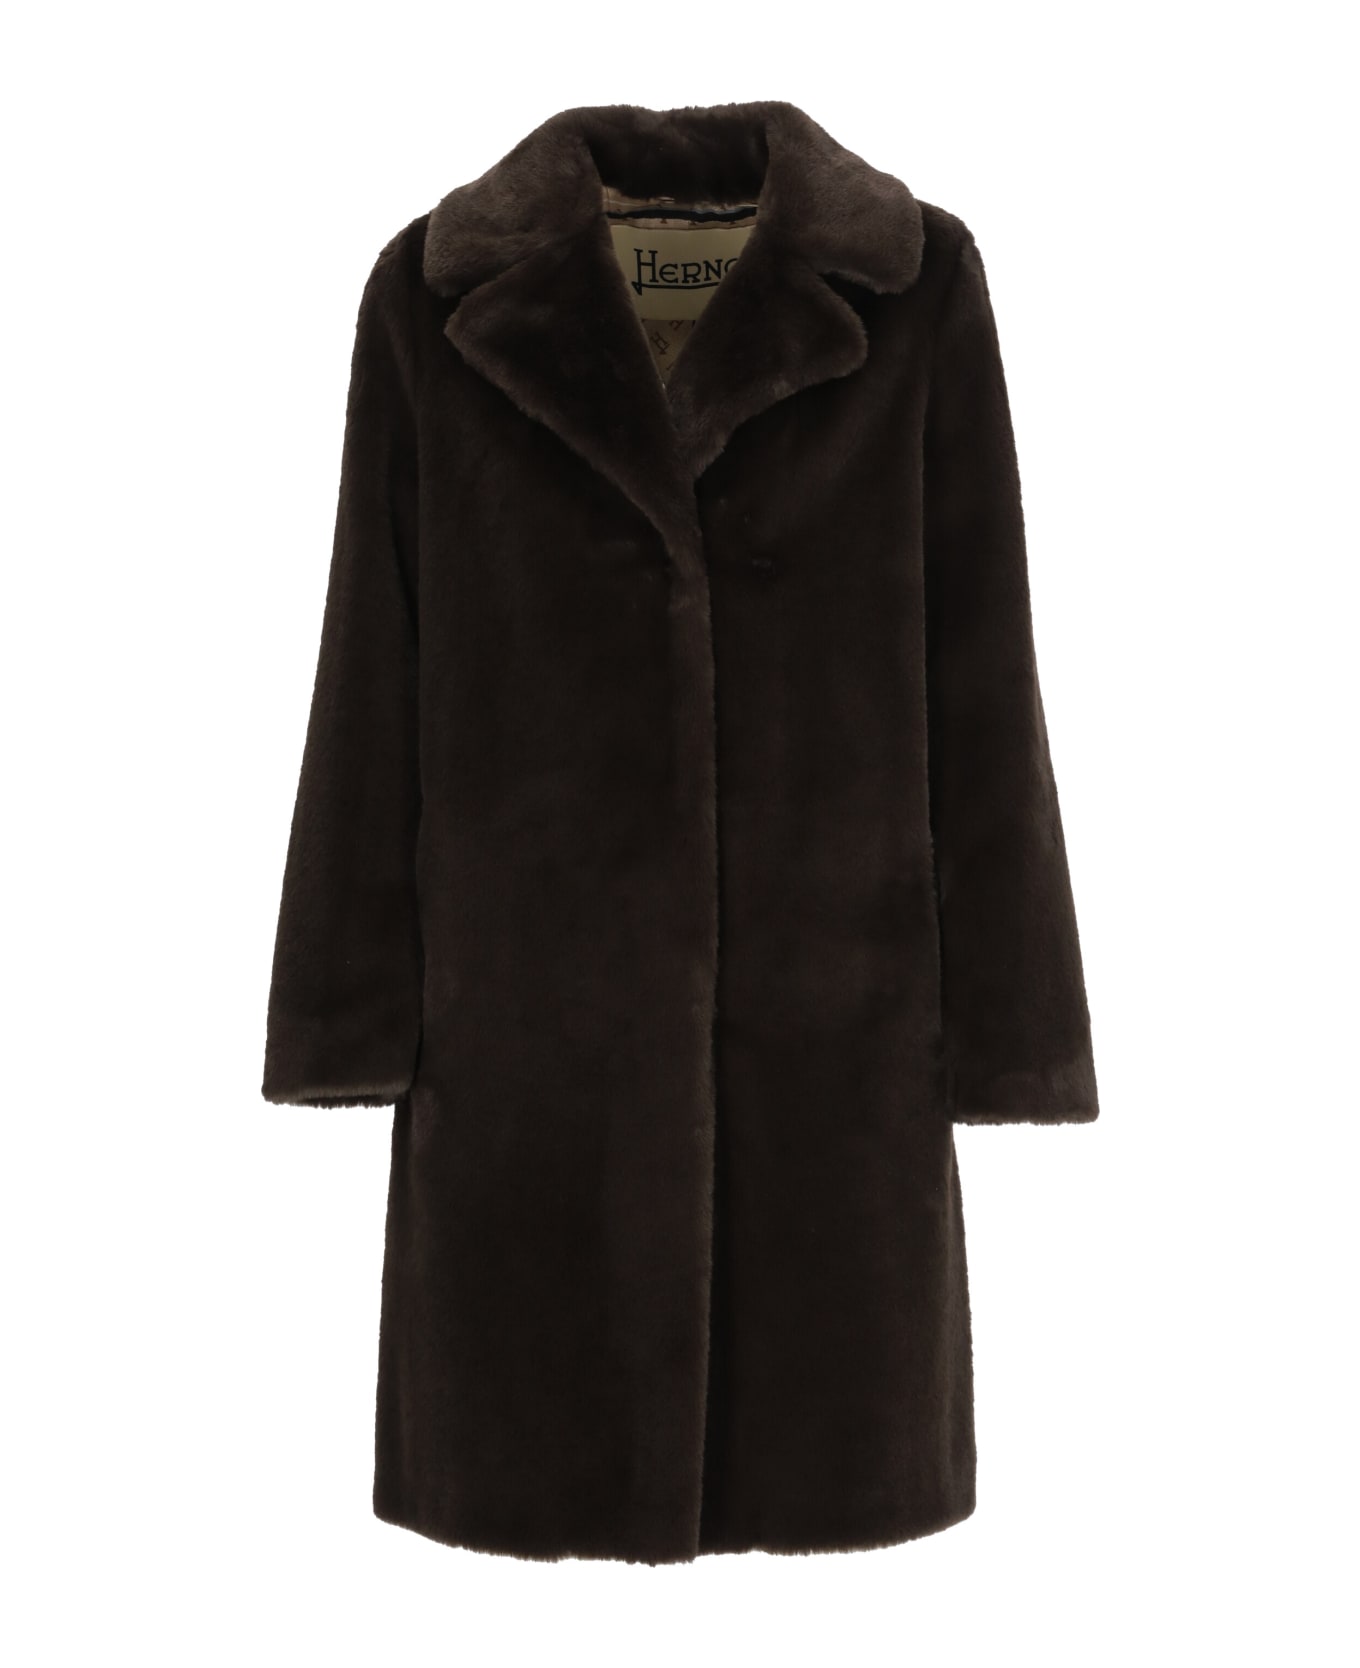 Herno Single-breasted Long Sleeved Coat - Brown コート